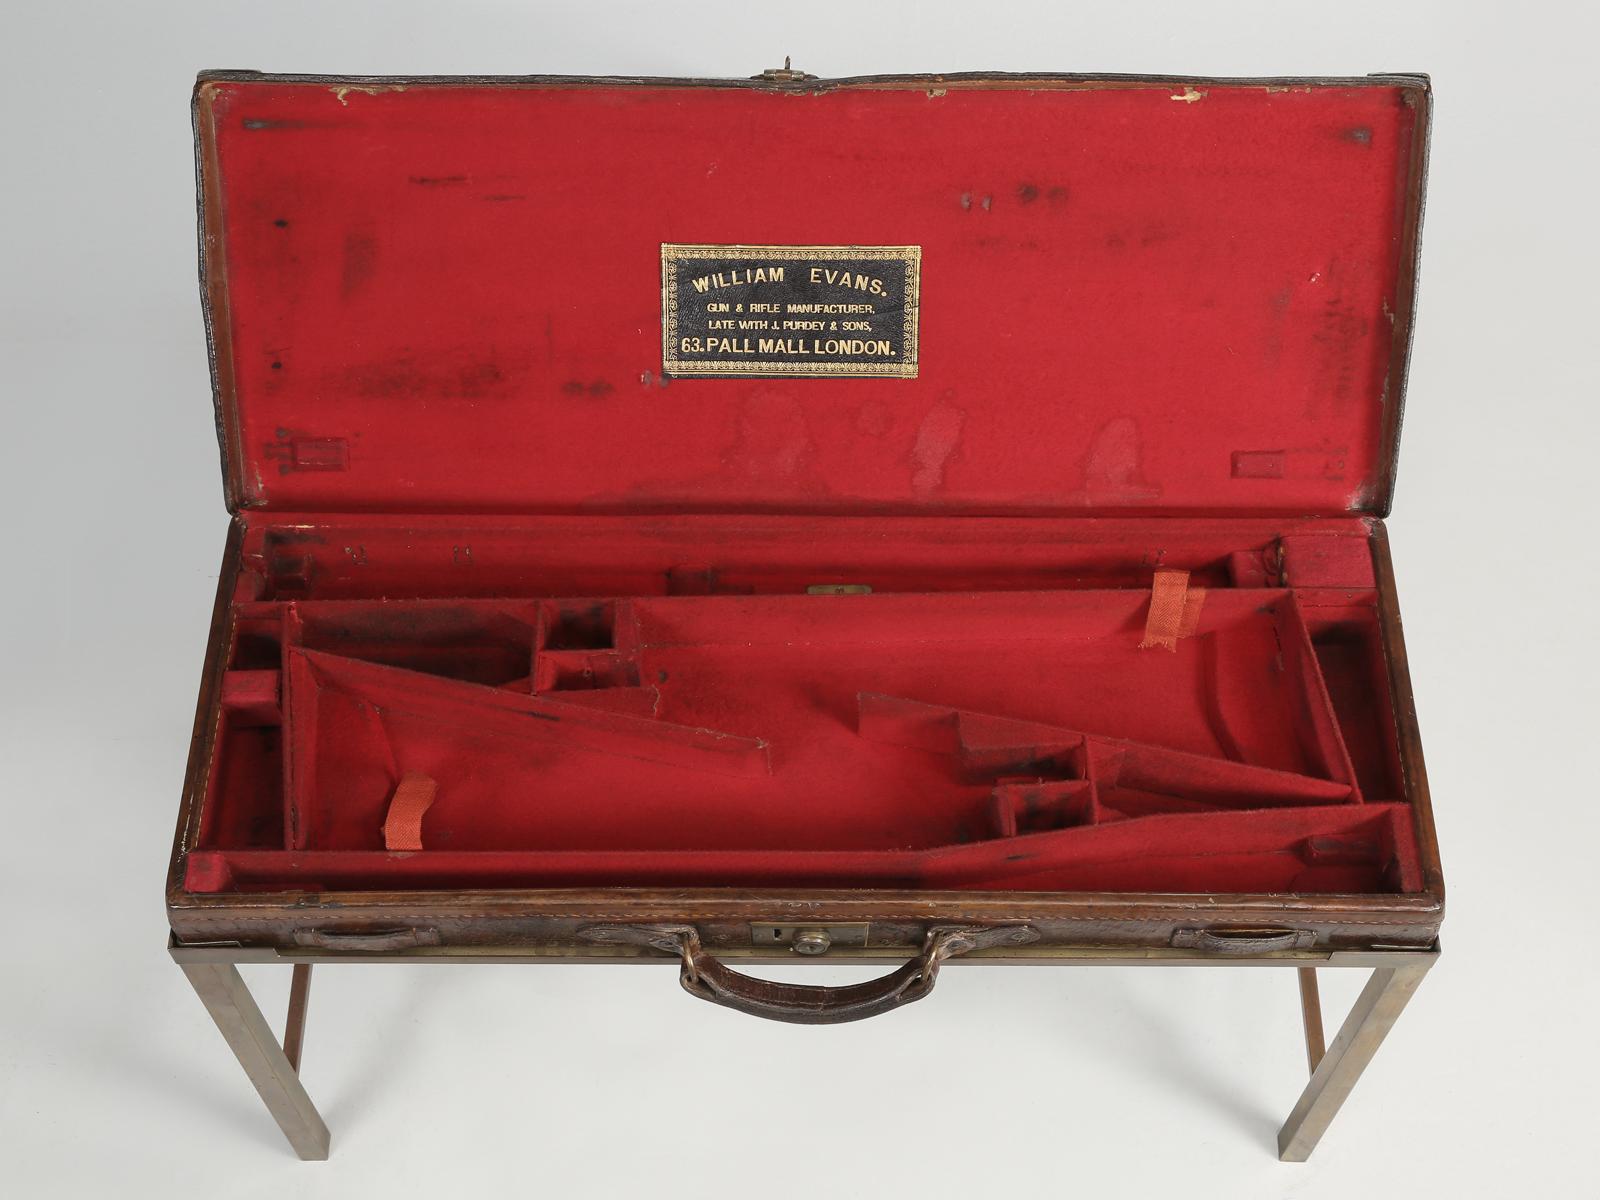 Antique William and Evans Leather Gun Case End Table with Brass Legs, c1900-1920 For Sale 11